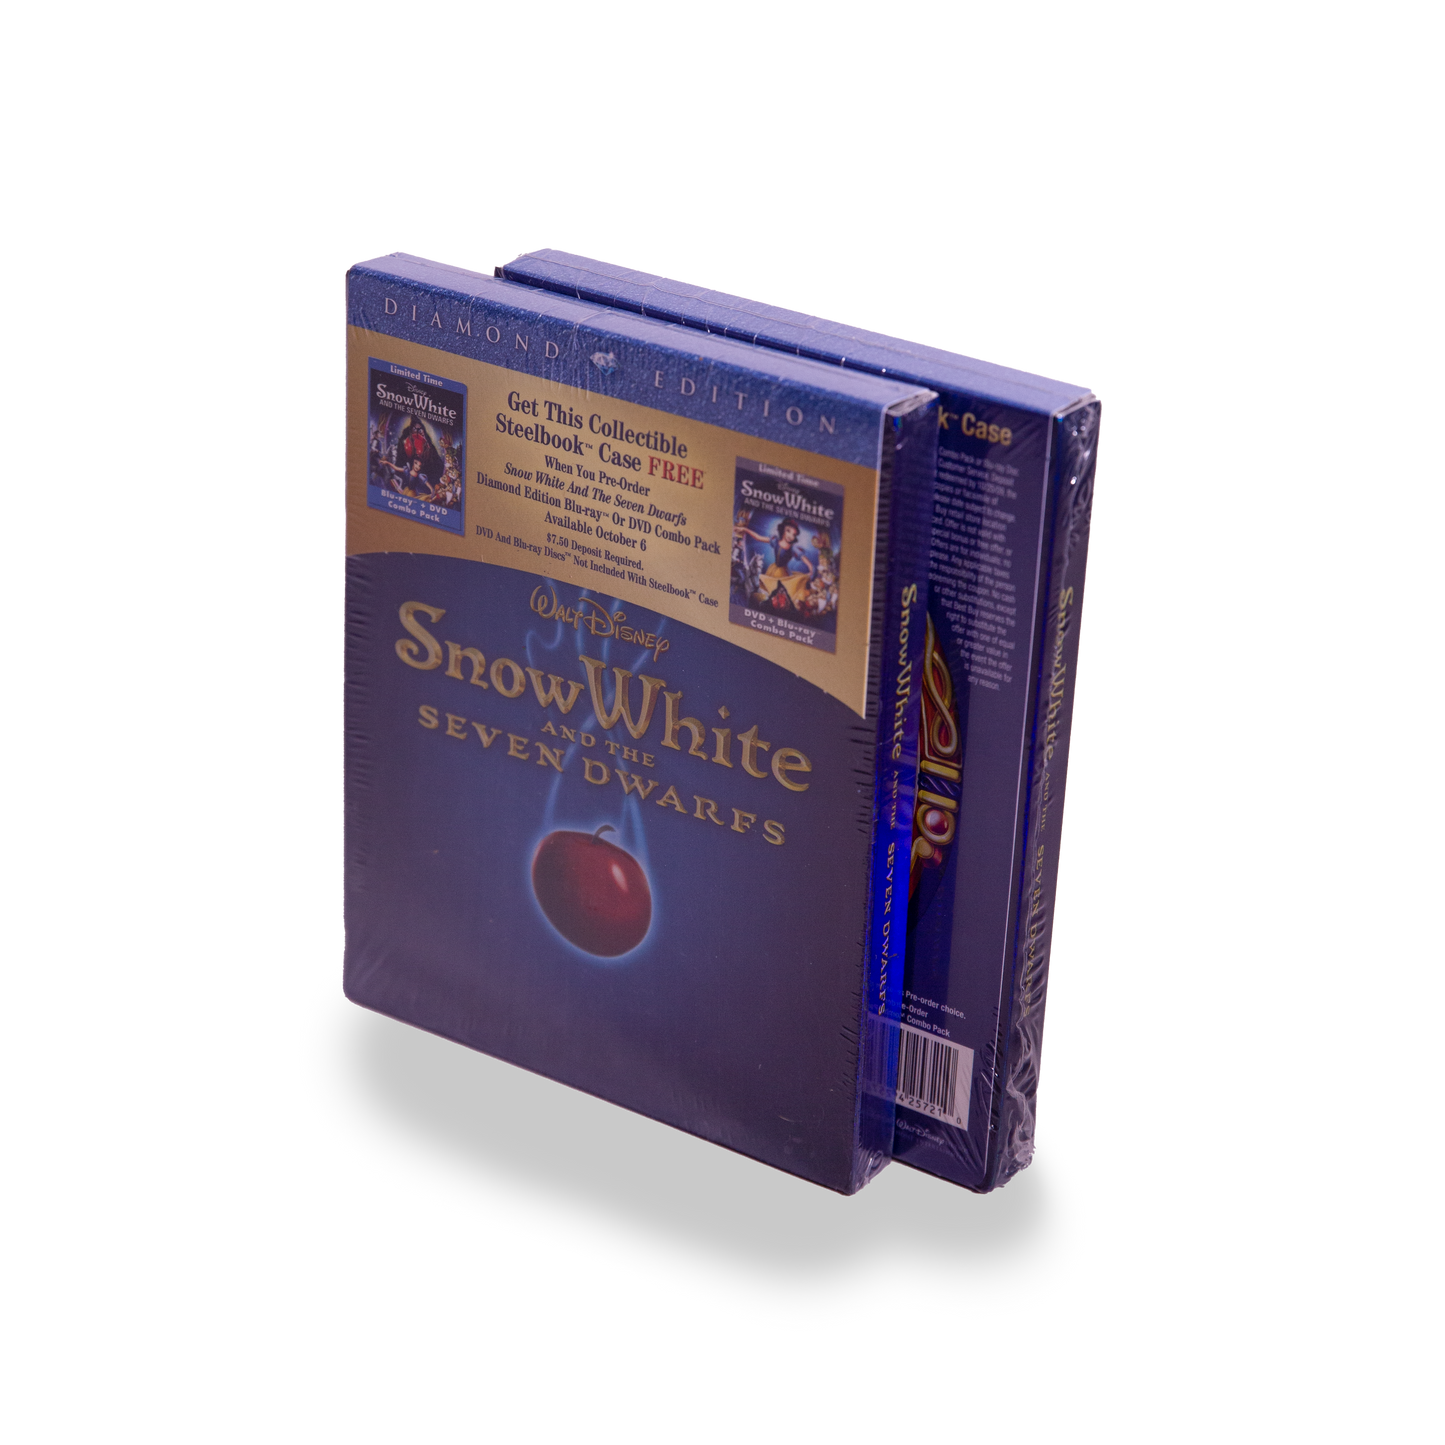 Snow White and the Seven Dwarfs collectible case